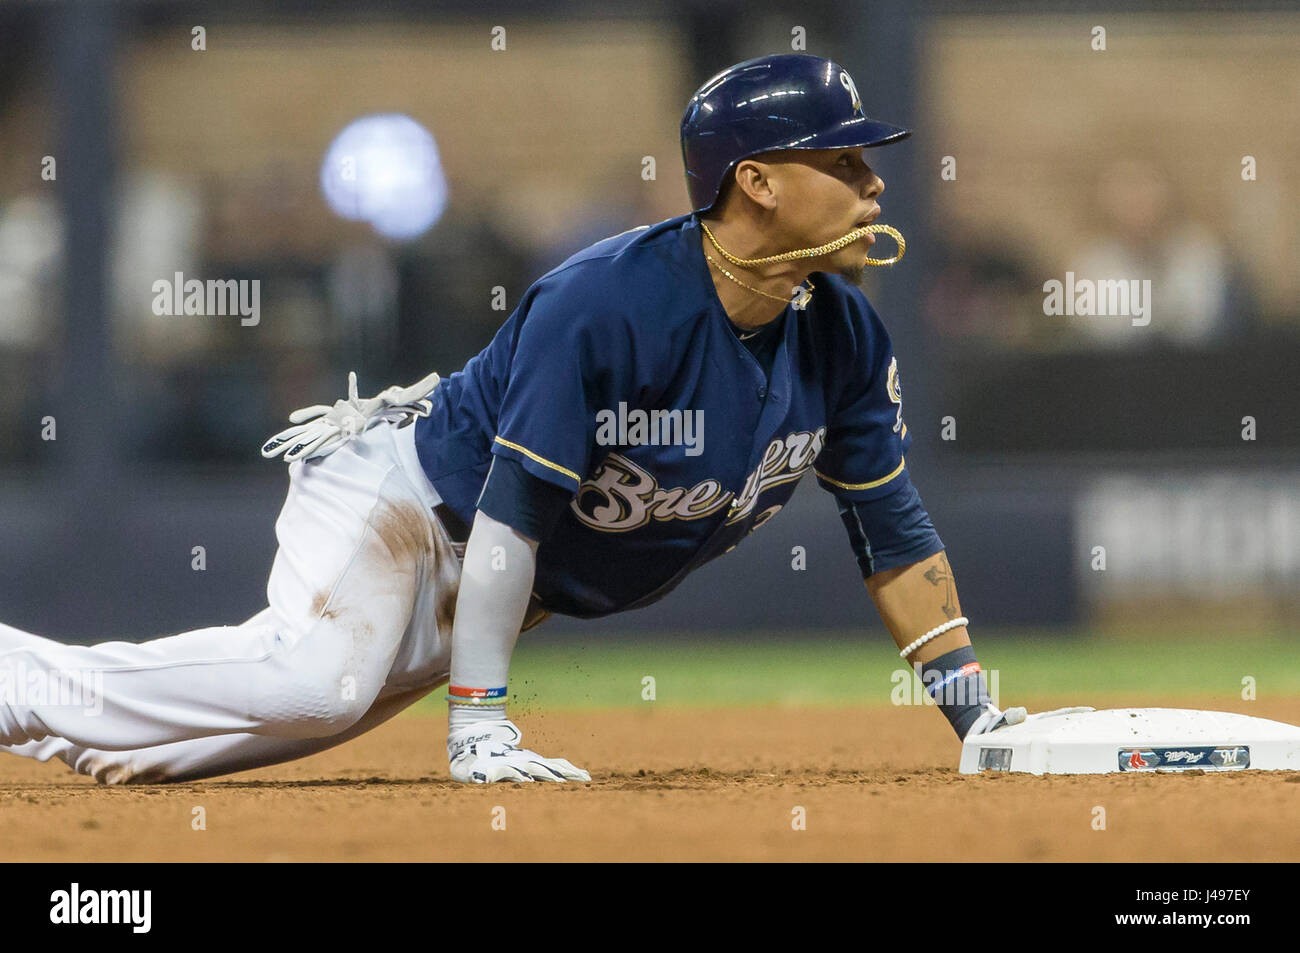 The Tag. 9th May, 2017. Milwaukee Brewers shortstop Orlando Arcia #3 dives back to second base and waits the call from the field umpire during the Major League Baseball game between the Milwaukee Brewers and the Boston Red Sox at Miller Park in Milwaukee, WI. Arcia was called out on the tag. John Fisher/CSM/Alamy Live News Stock Photo